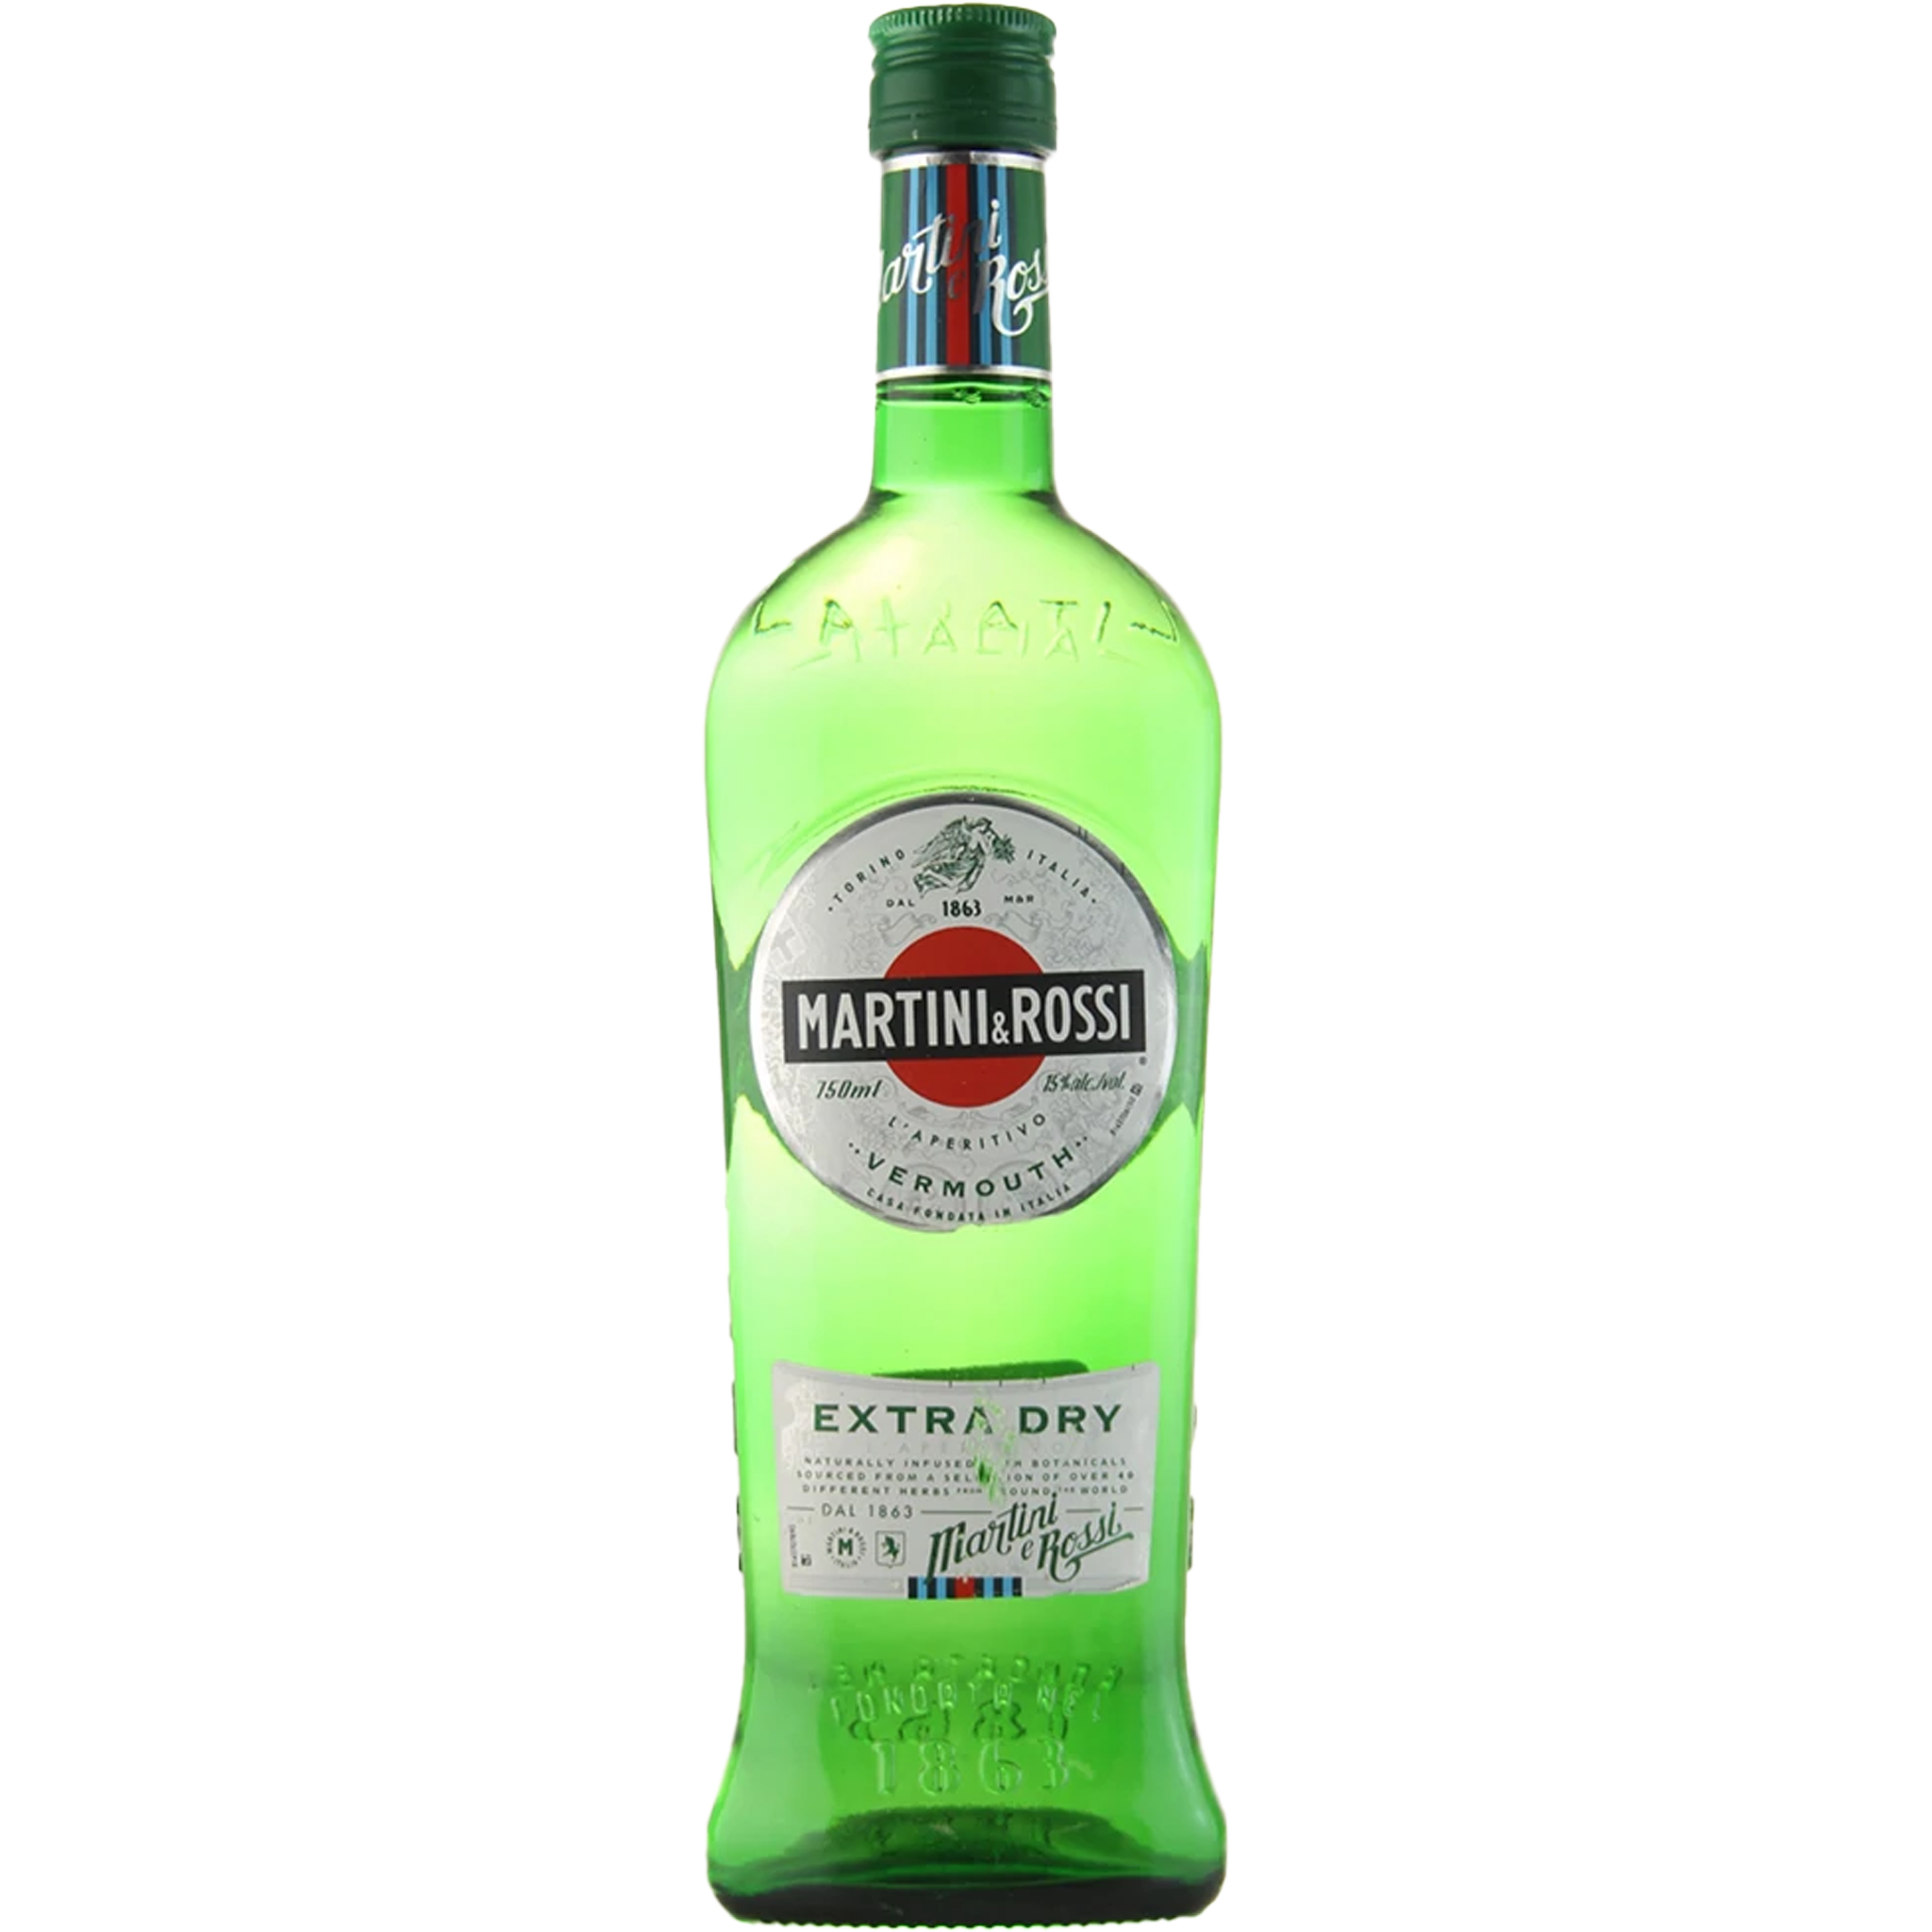 Martini Rossi Extra Dry Vermouth 750ml